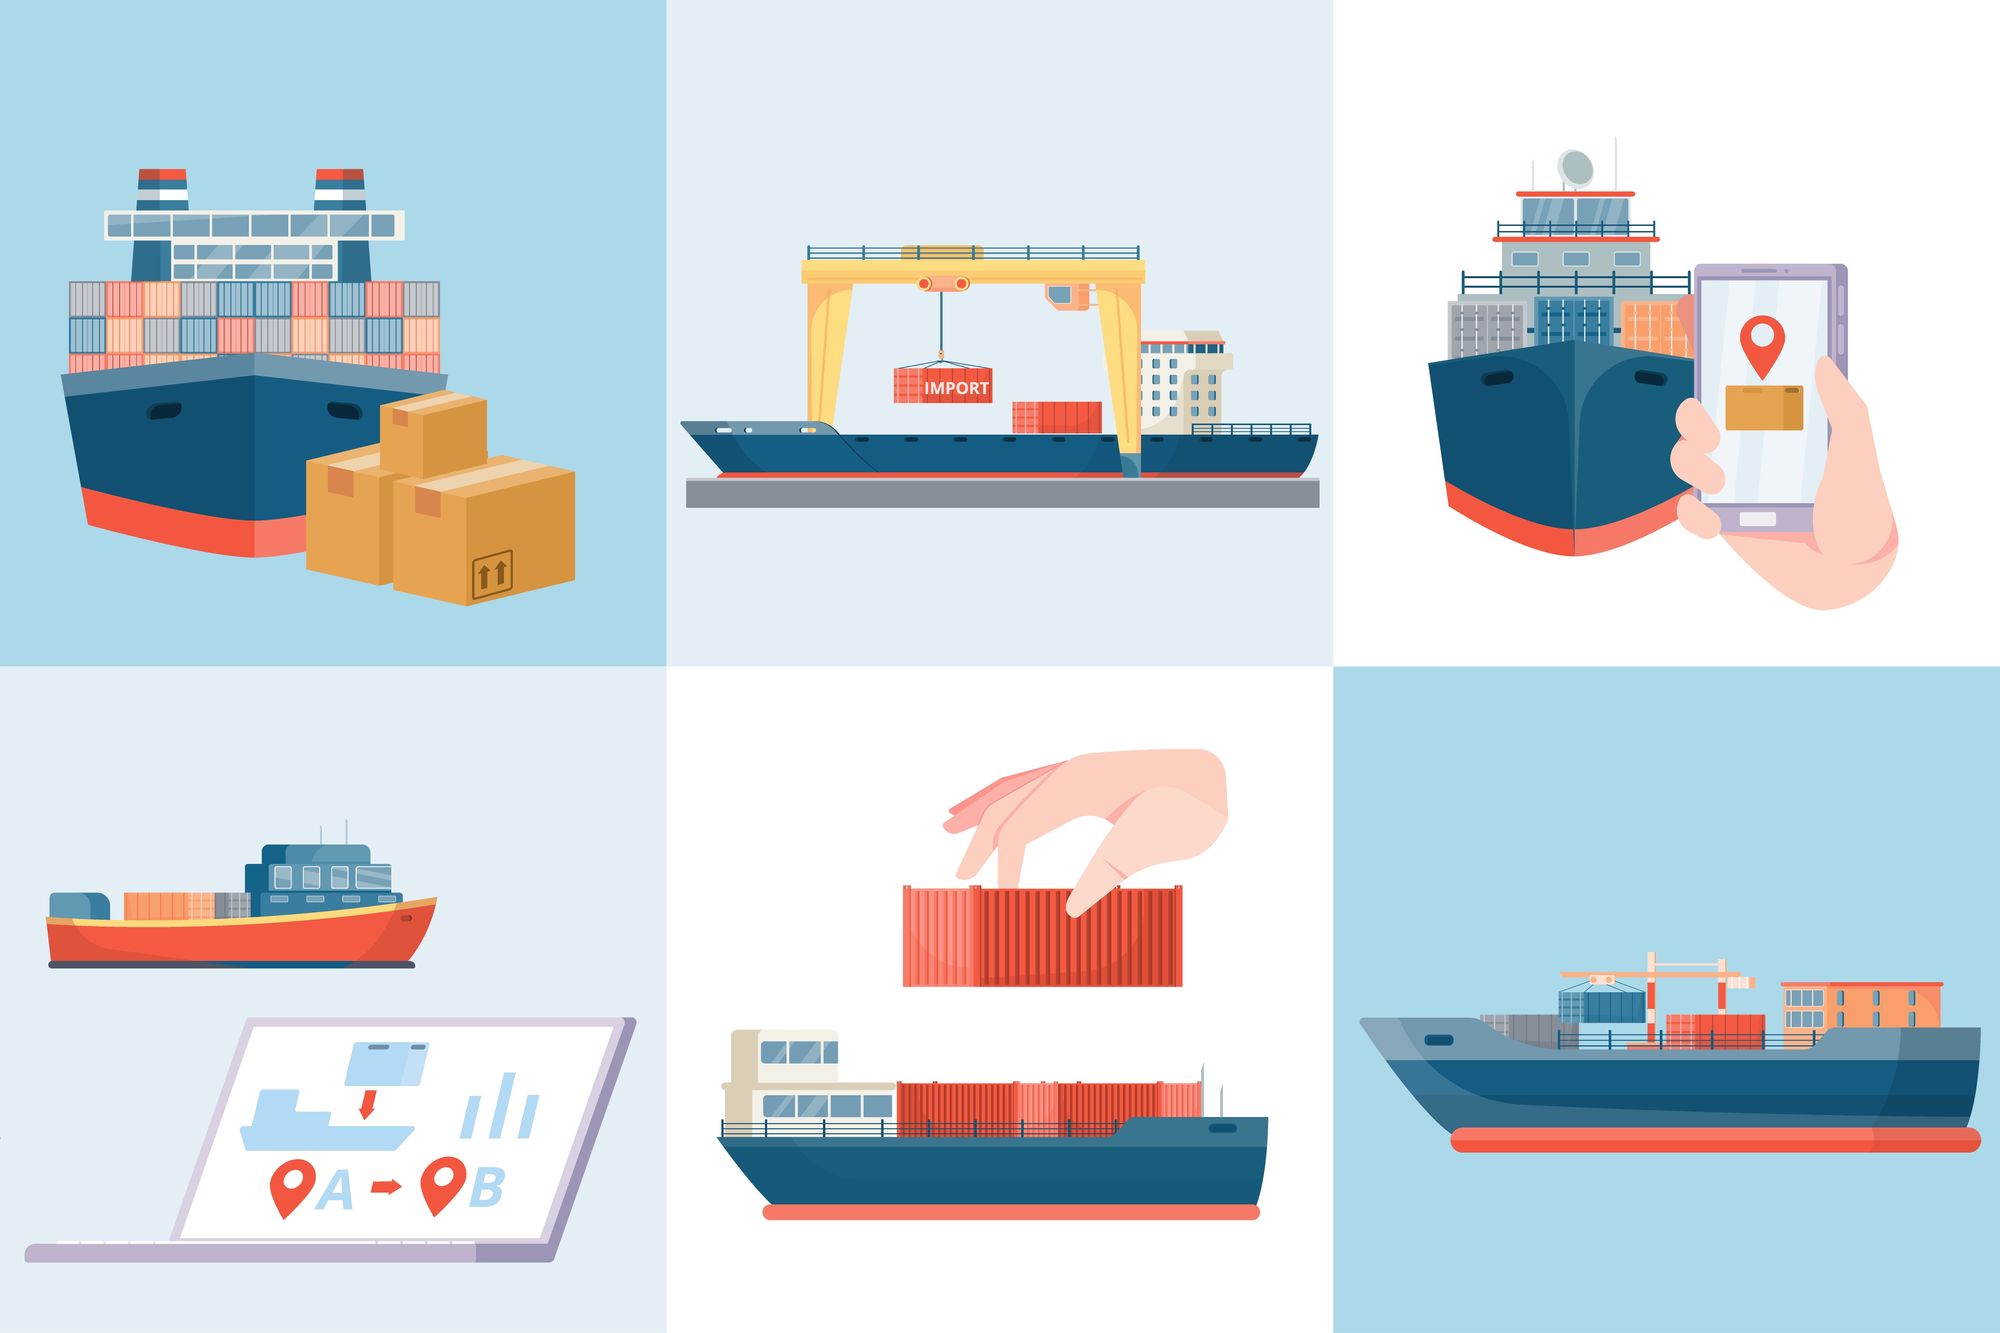 Illustrations of container ships